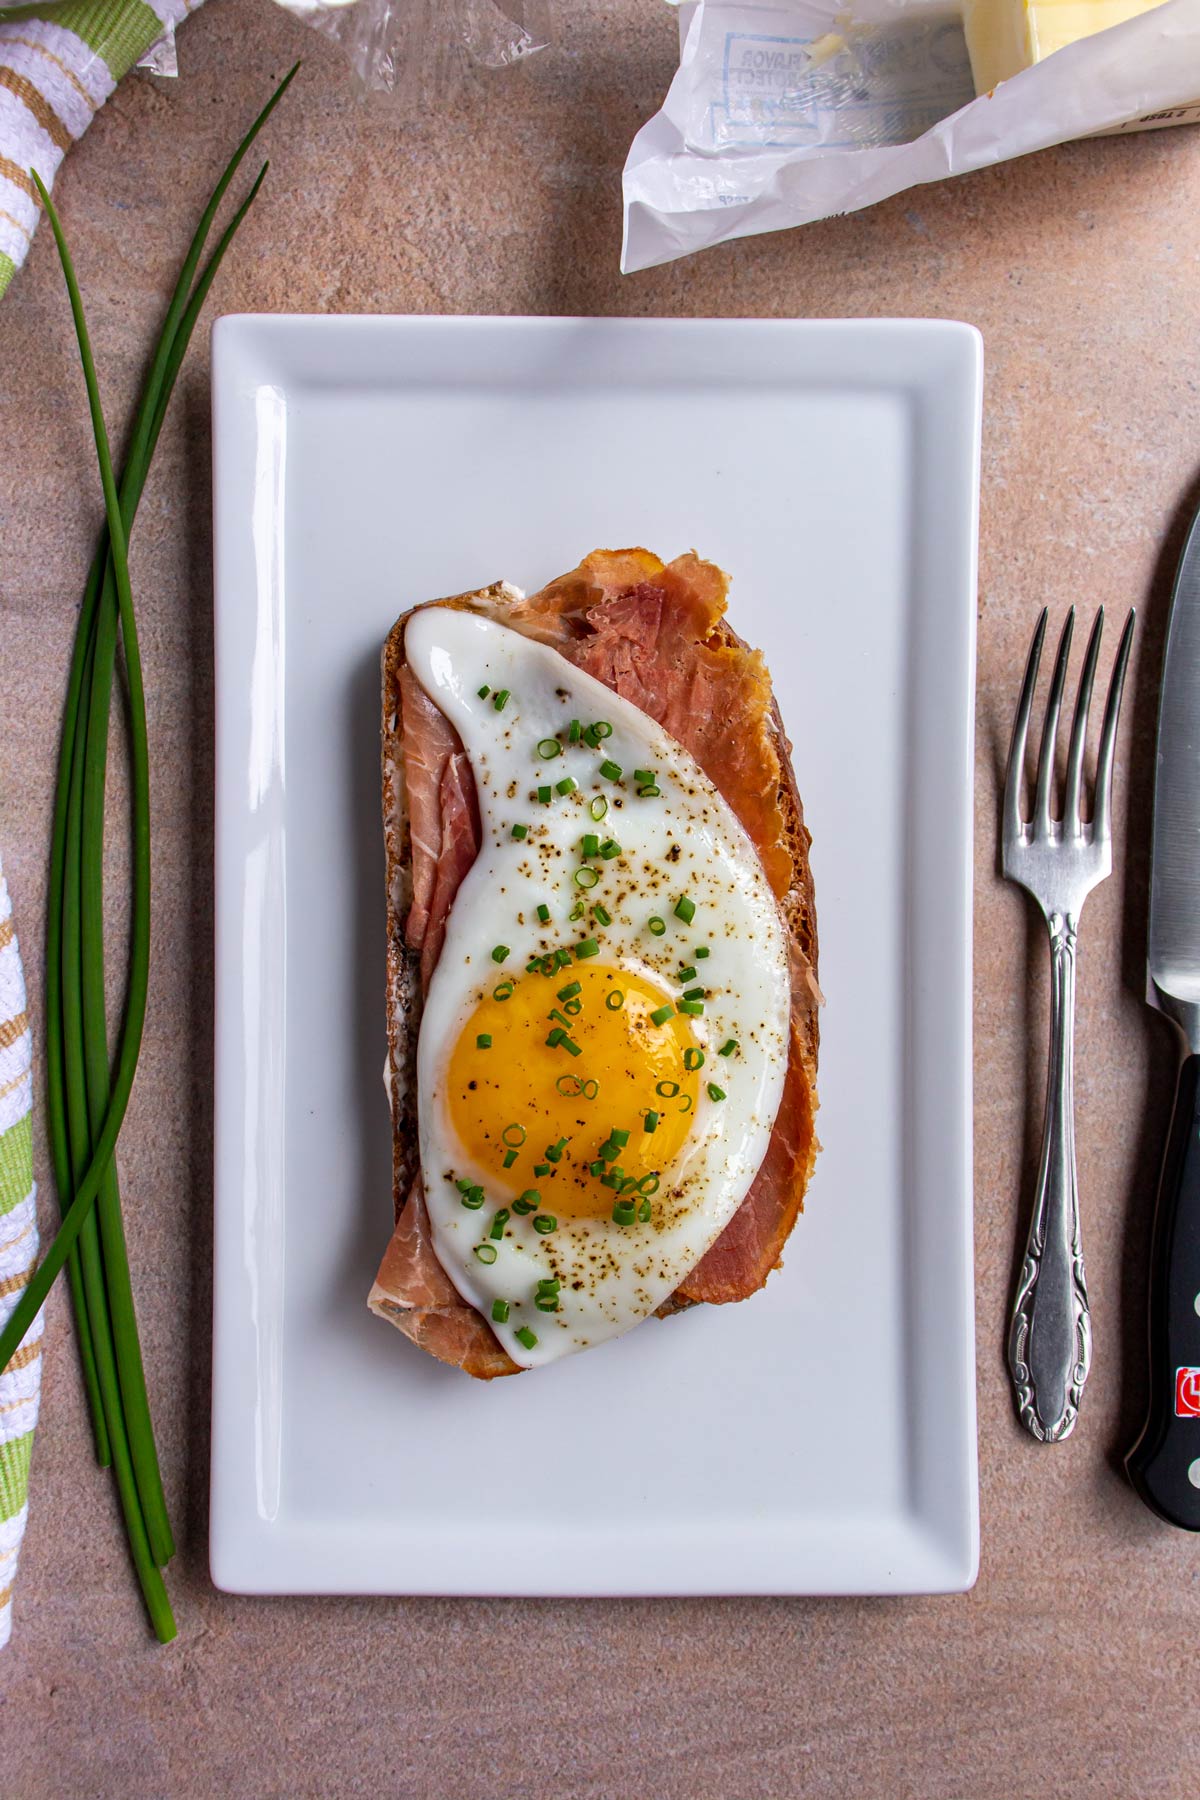 An open-faced sandwich with prosciutto, fried egg, and chopped chives on a white rectangular plate.